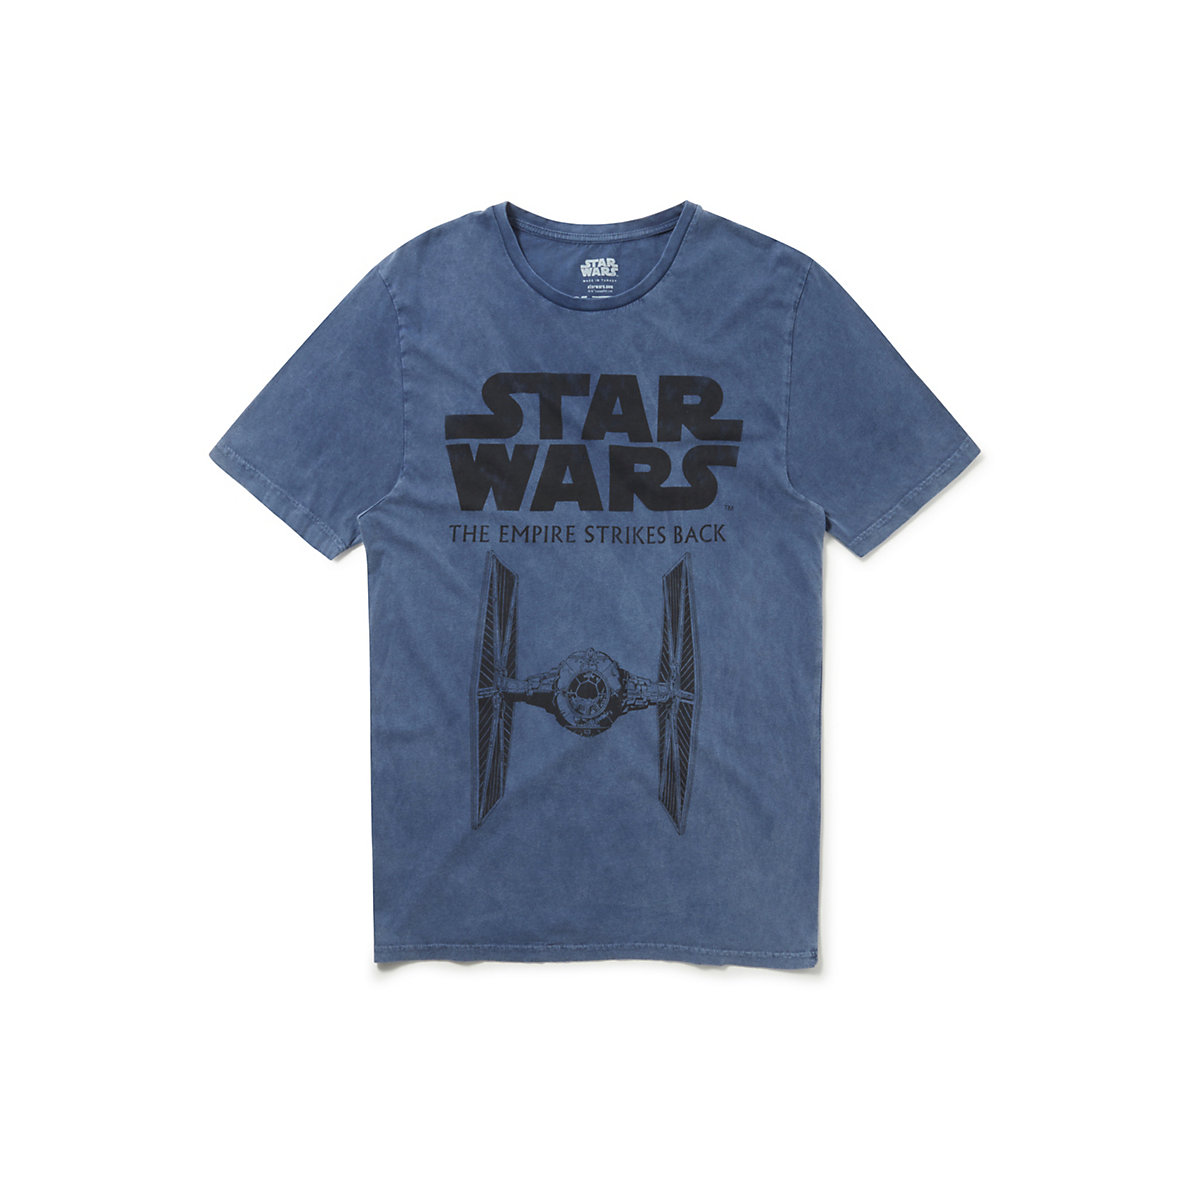 Star Wars Recovered T-Shirt Star Wars Empire Strikes Back Tie Fighter Washed Blue T-Shirts AdultM blau